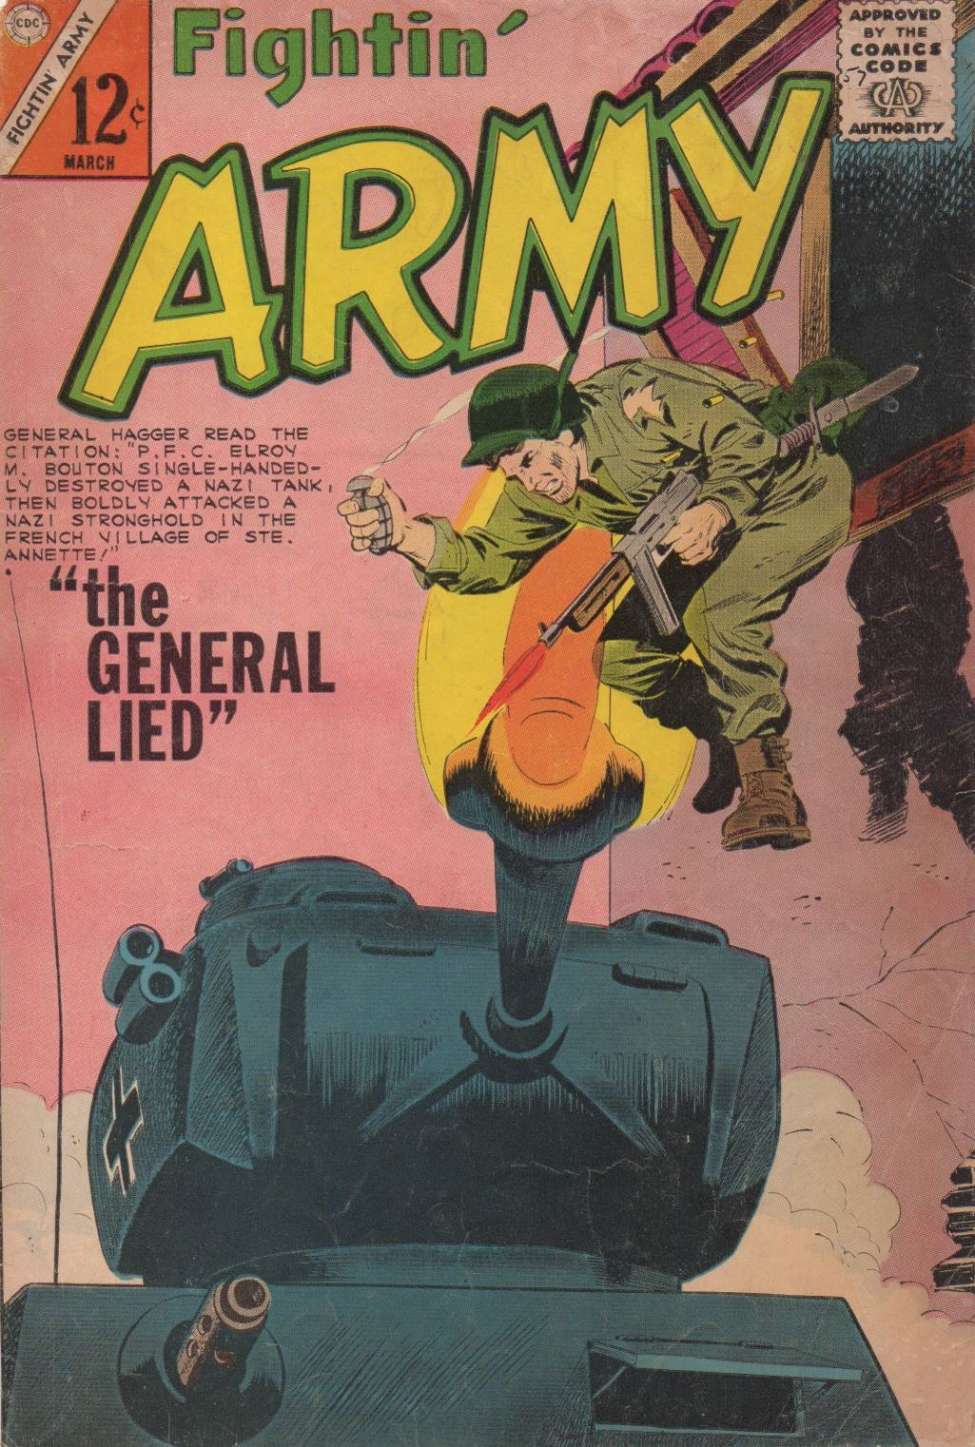 Comic Book Cover For Fightin' Army 57